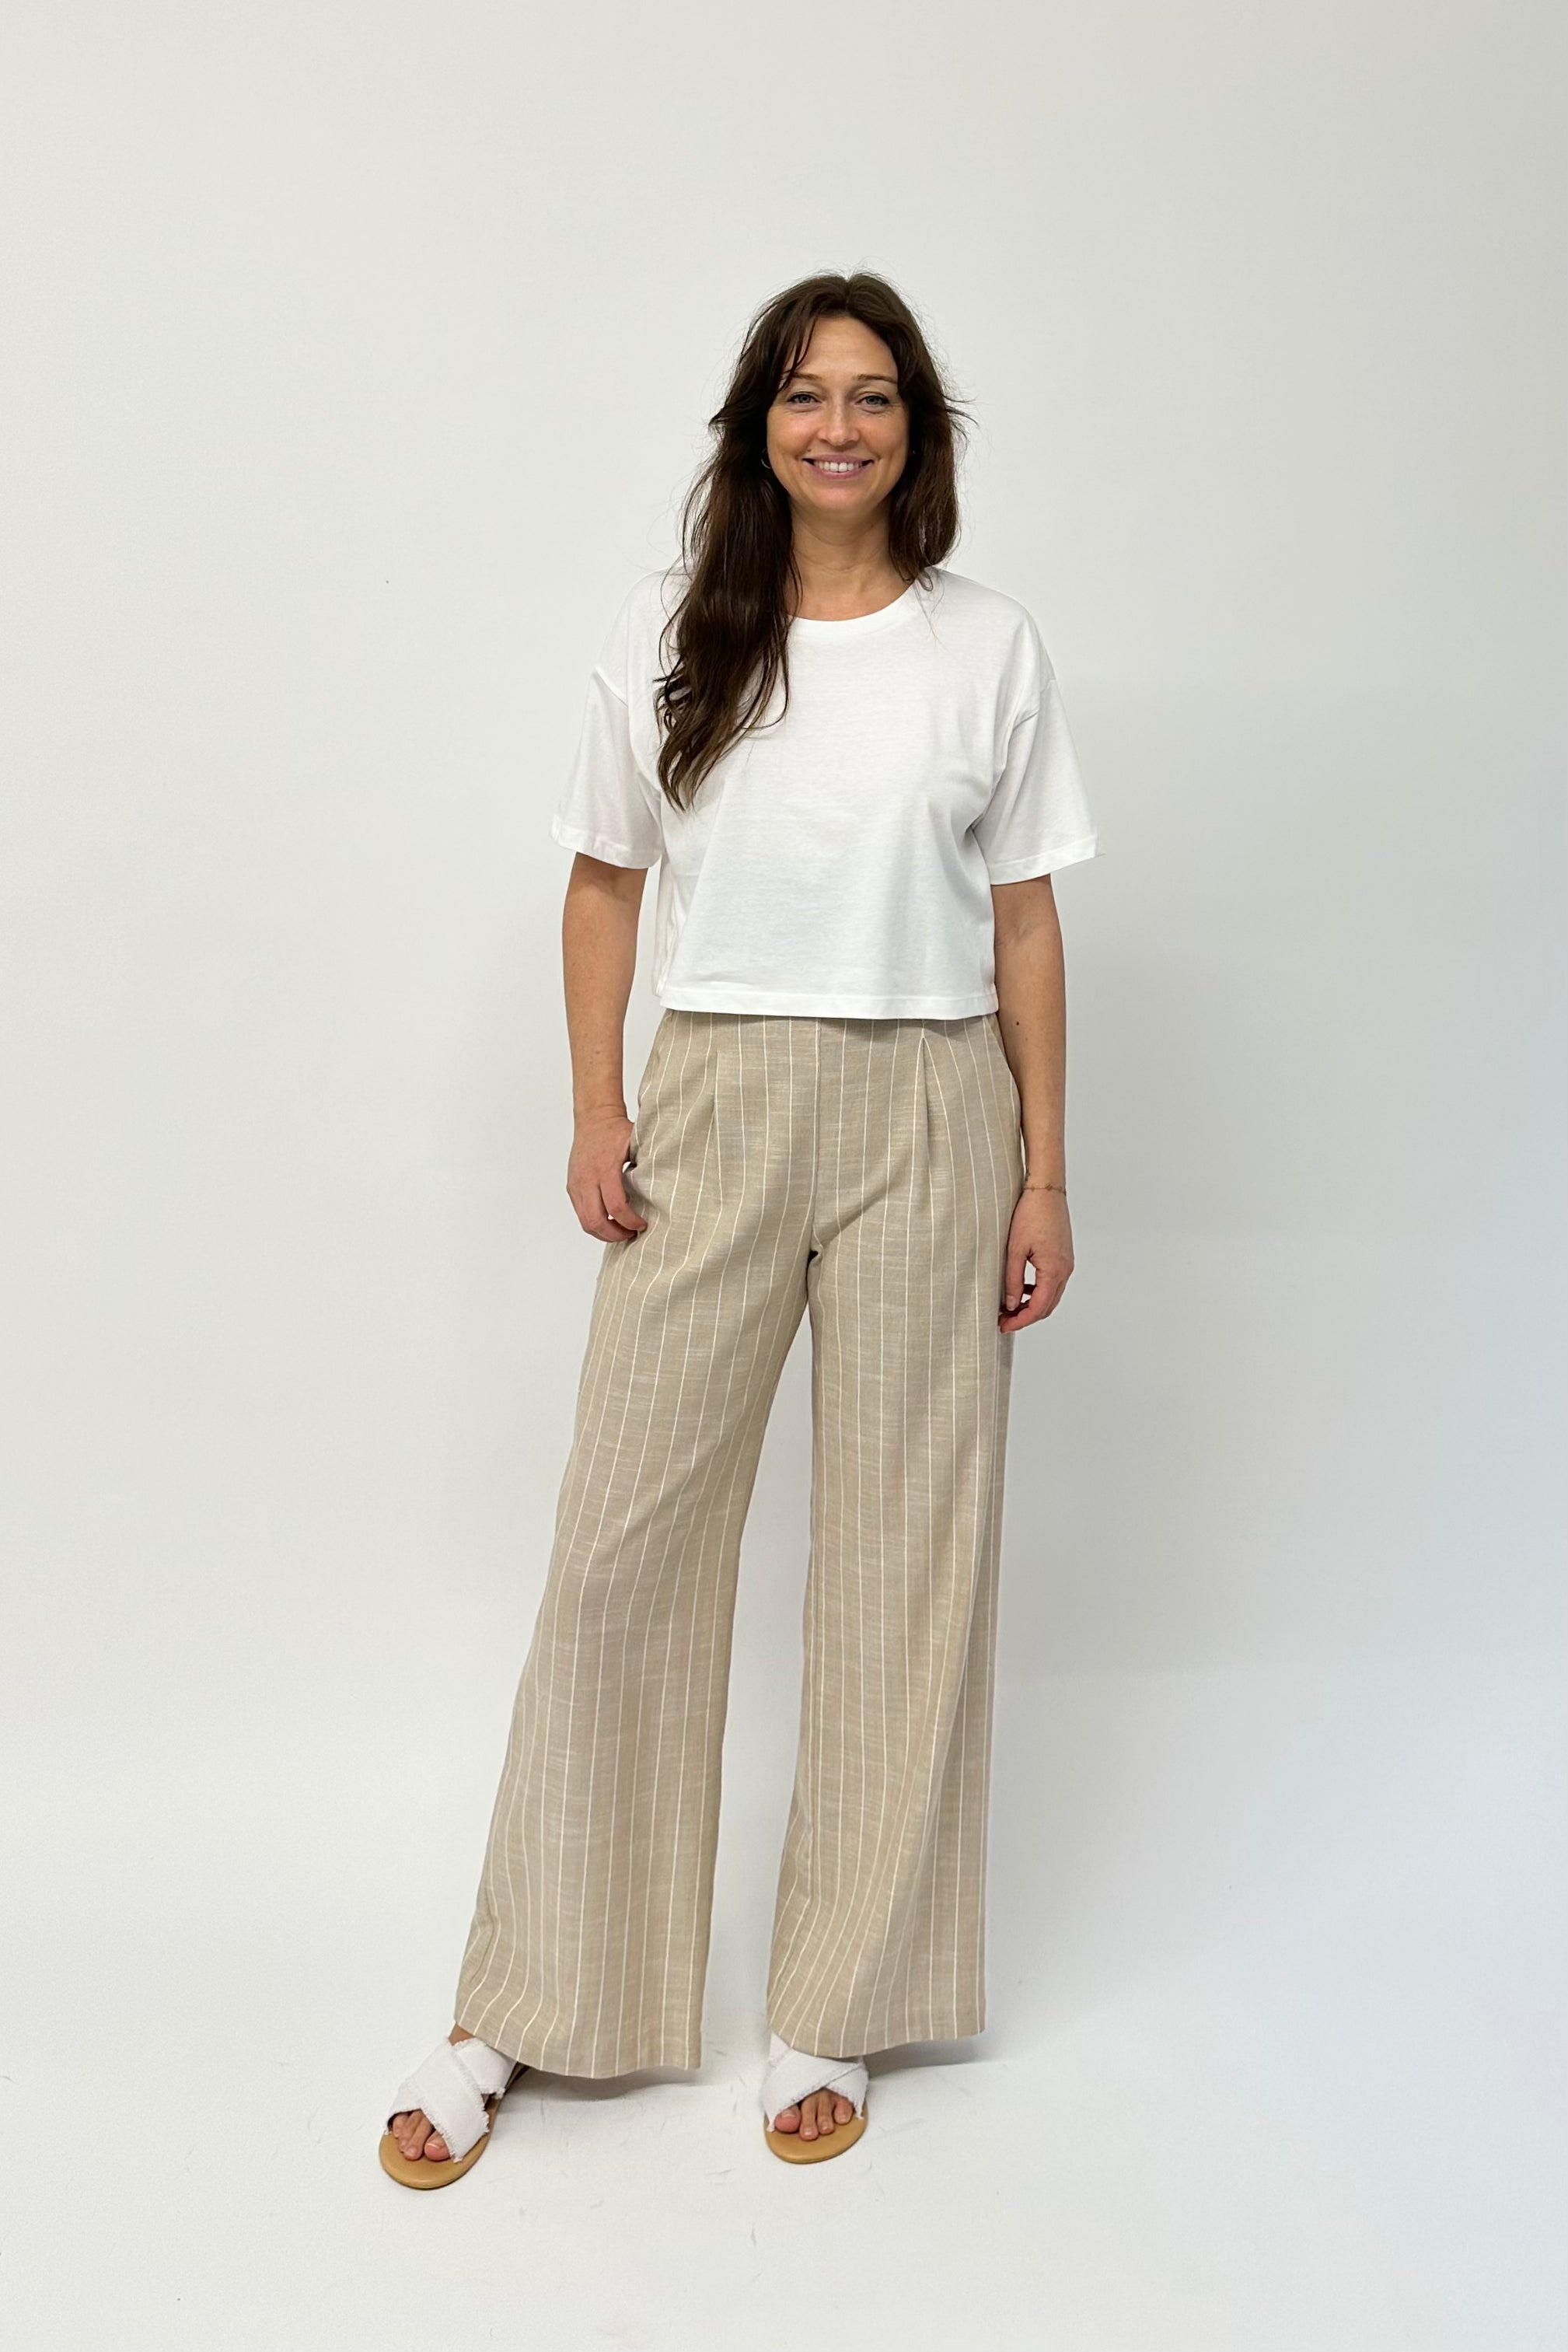 Linen pin striped pants made sustainably in Australia